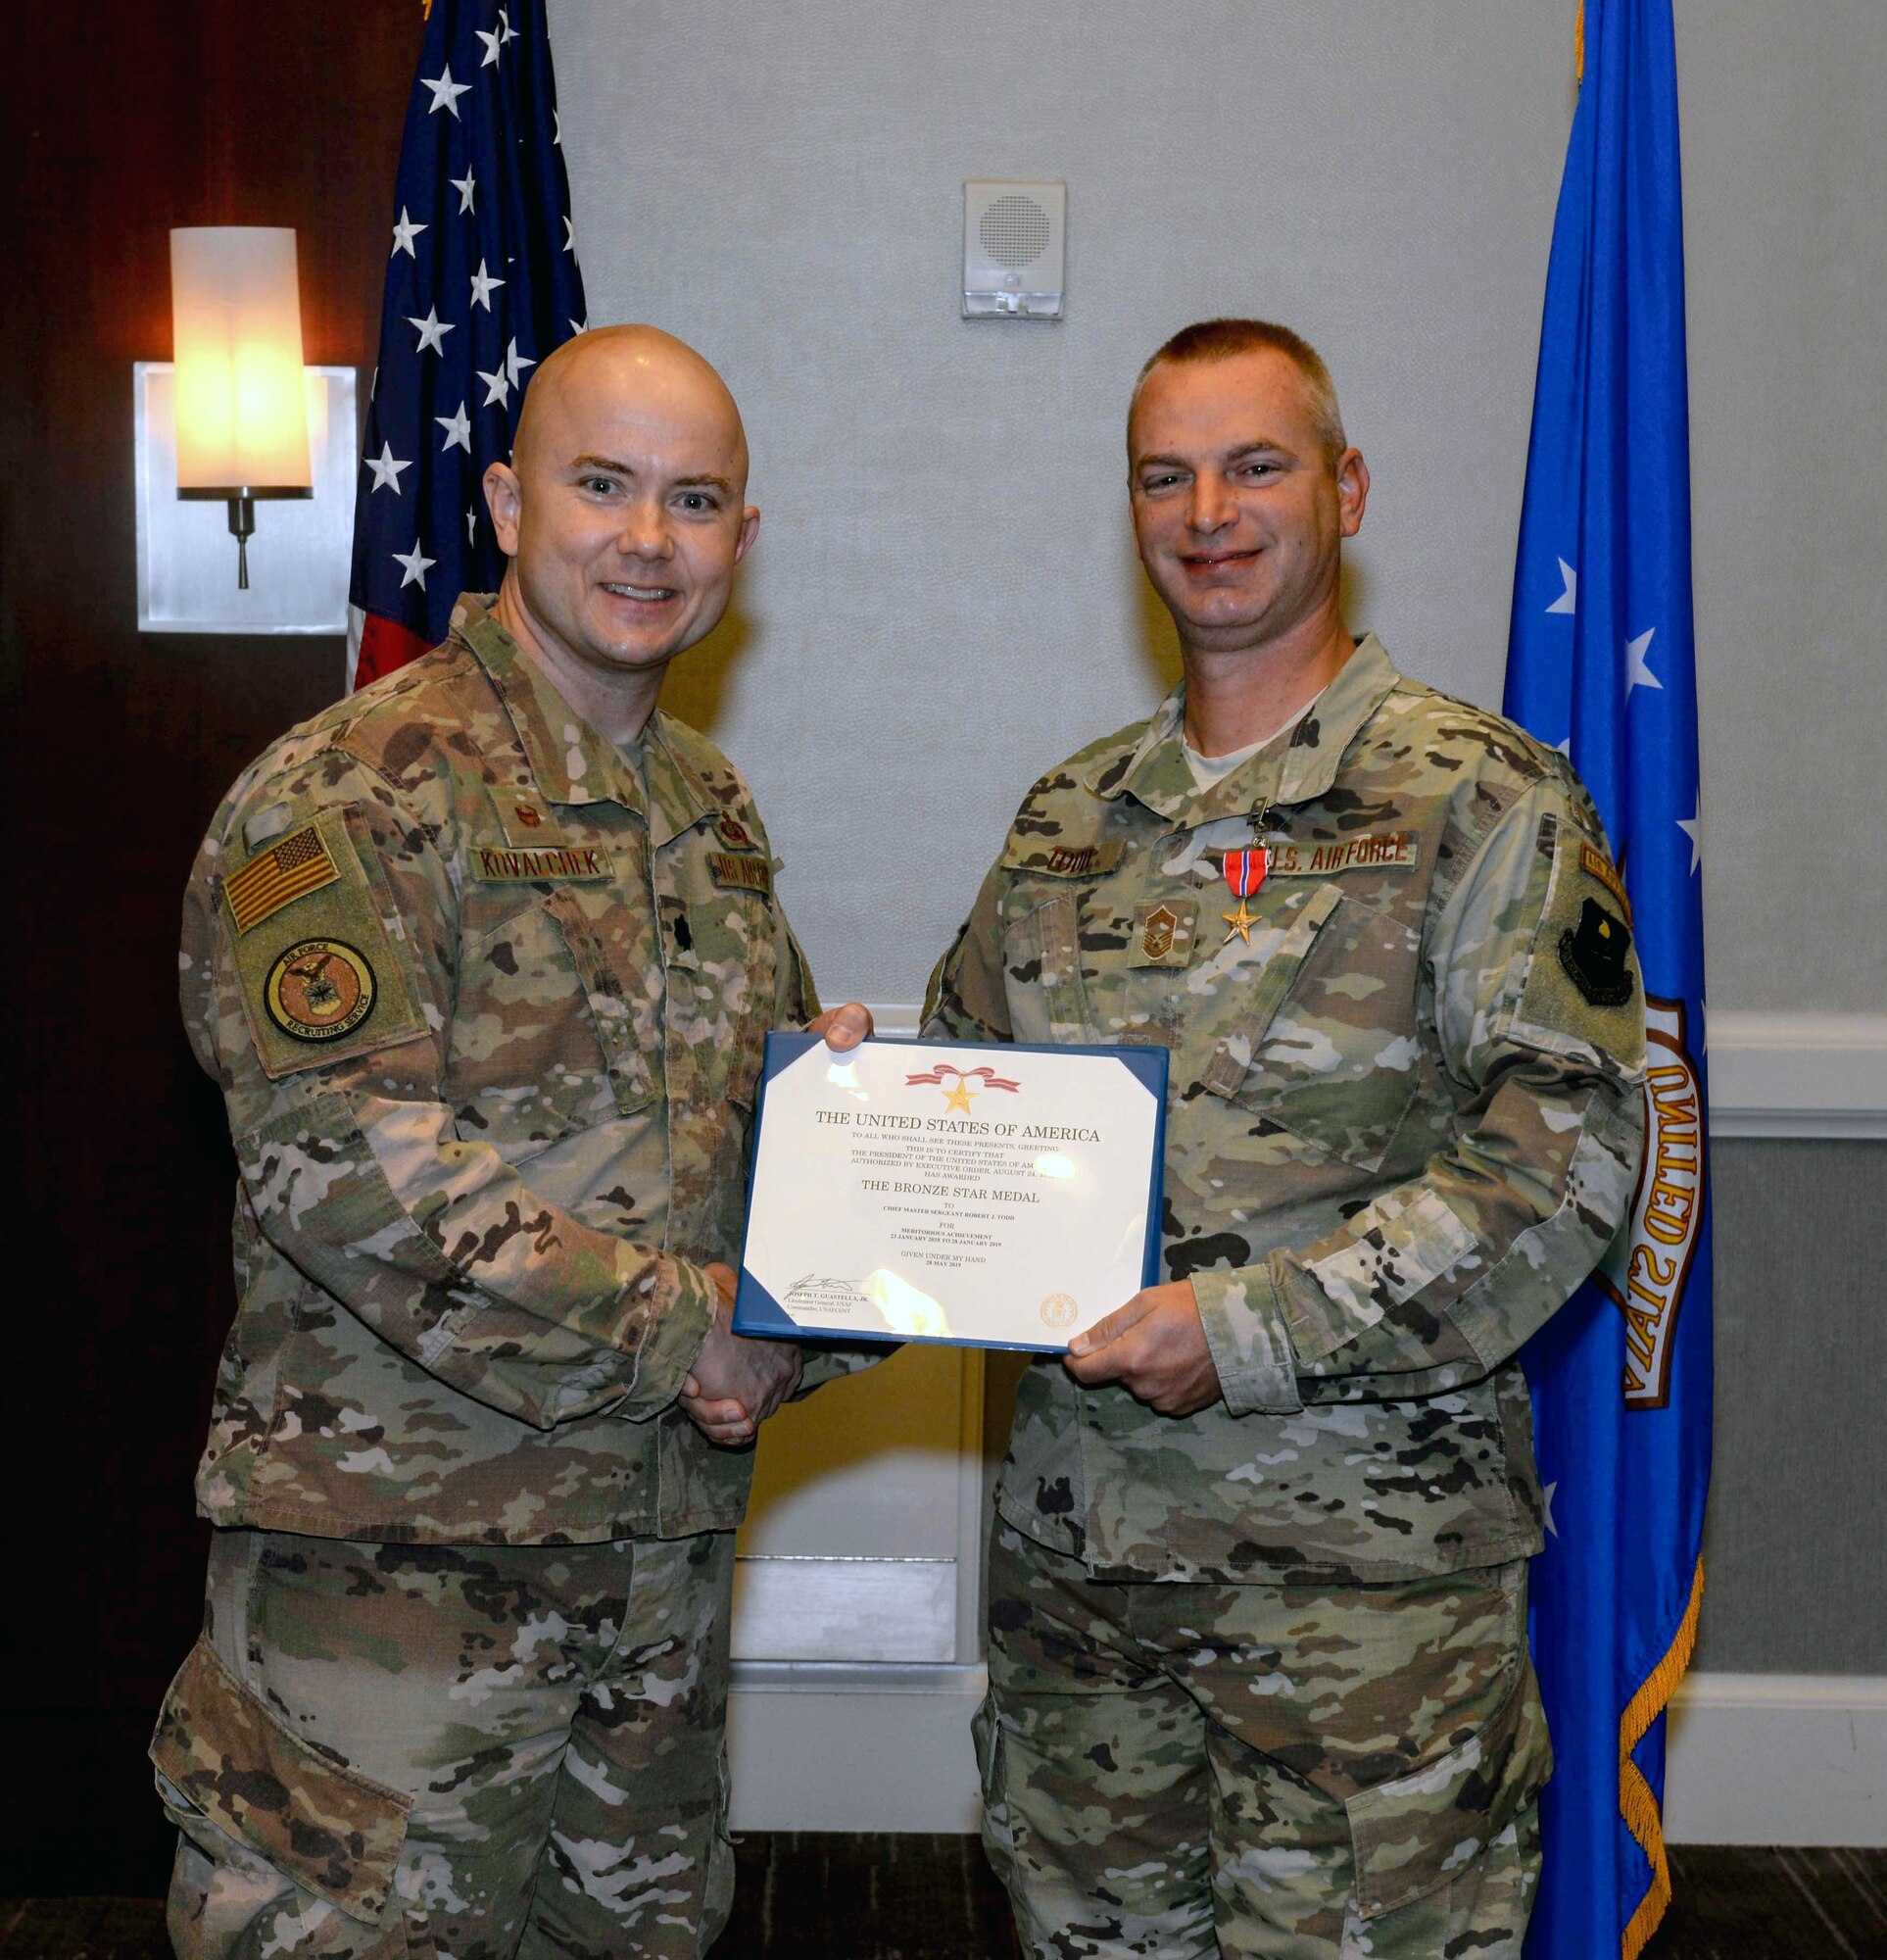 Chief Master Sgt. Robert J. Todd, 332 Recruiting Squadron superintendent, is awarded the Bronze Star medal on Nov. 9, 2019, in Huntsville, Ala.